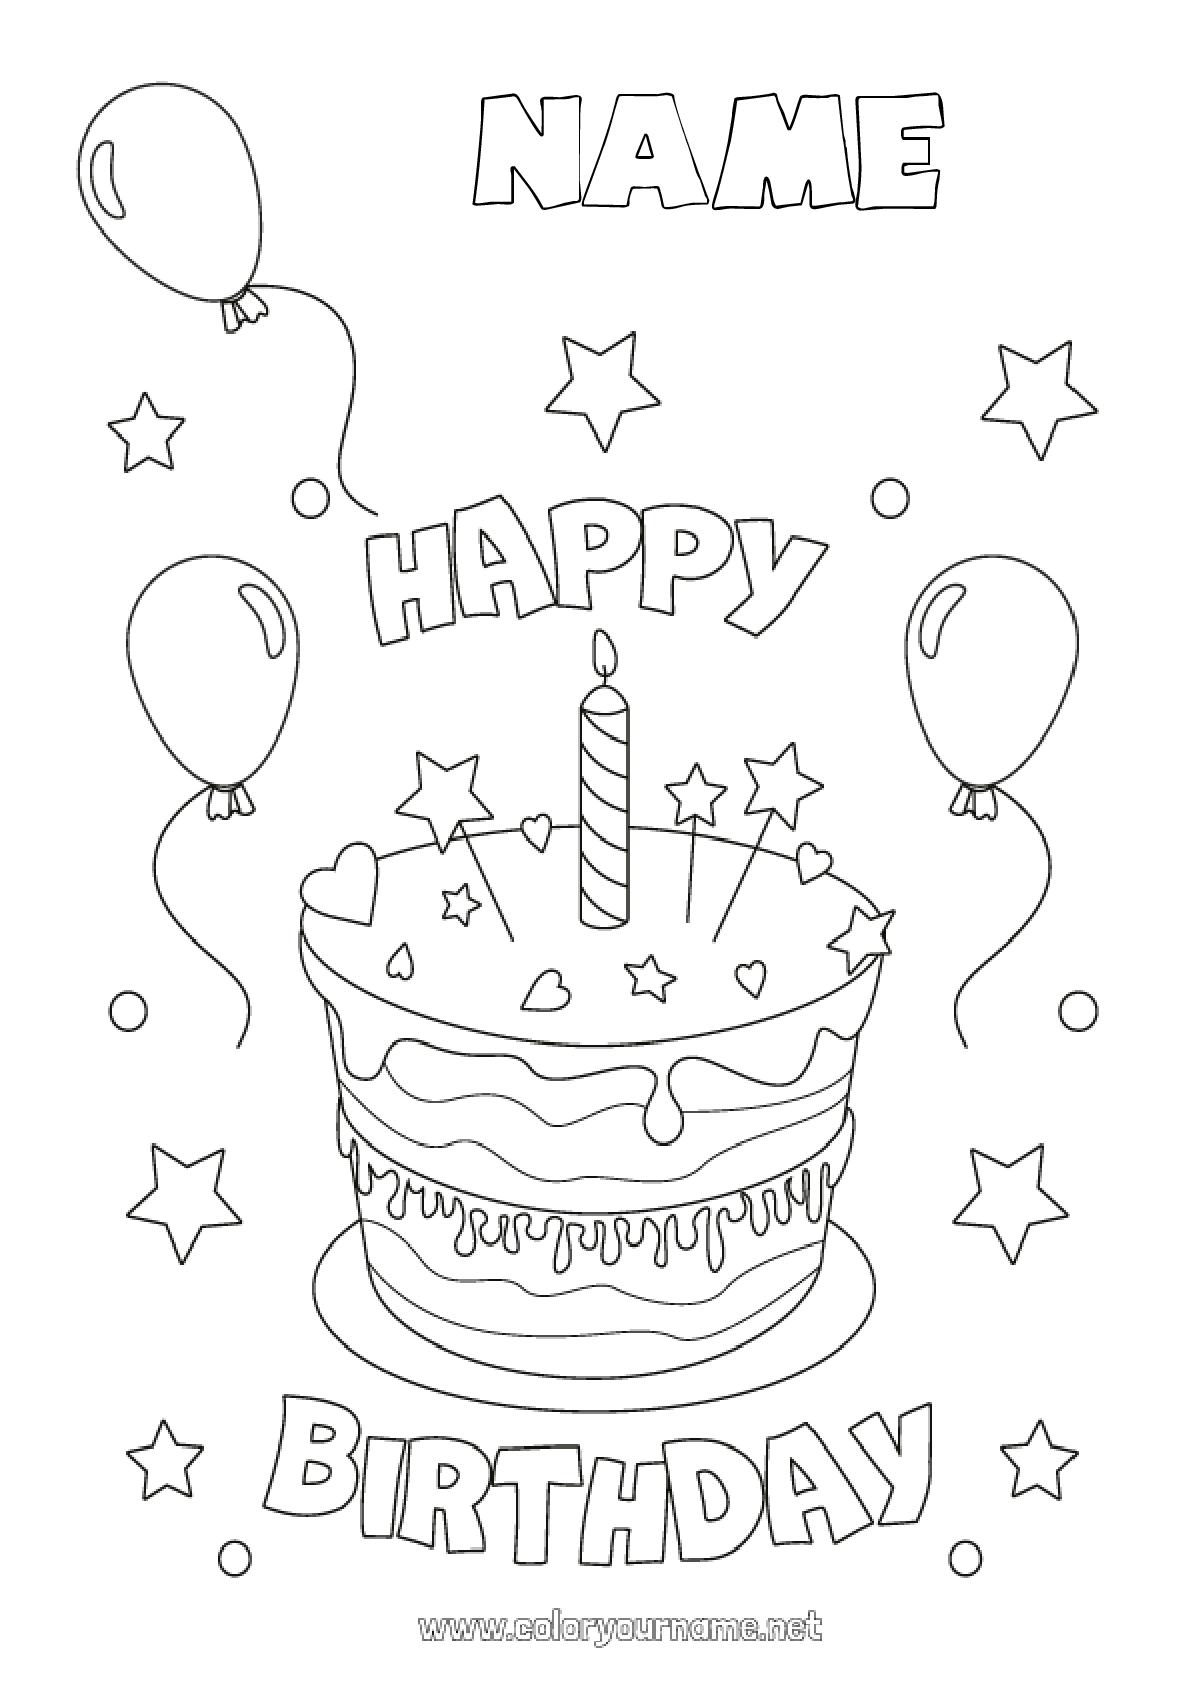 Coloring page No.176 - Candle Cake Birthday